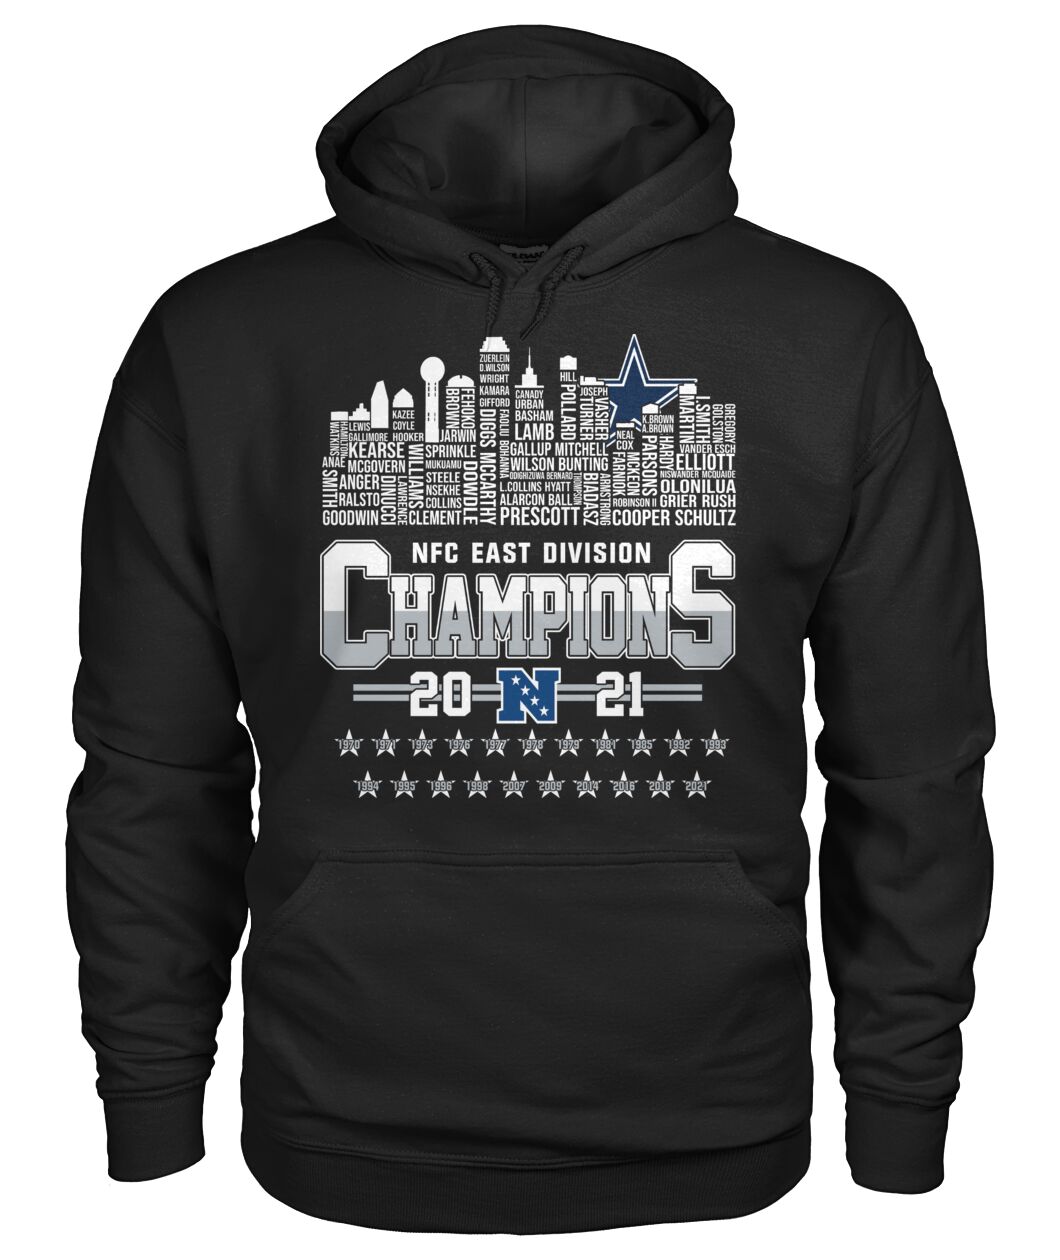 NFC East Division Champions 2021 3D Hoodie Shirt